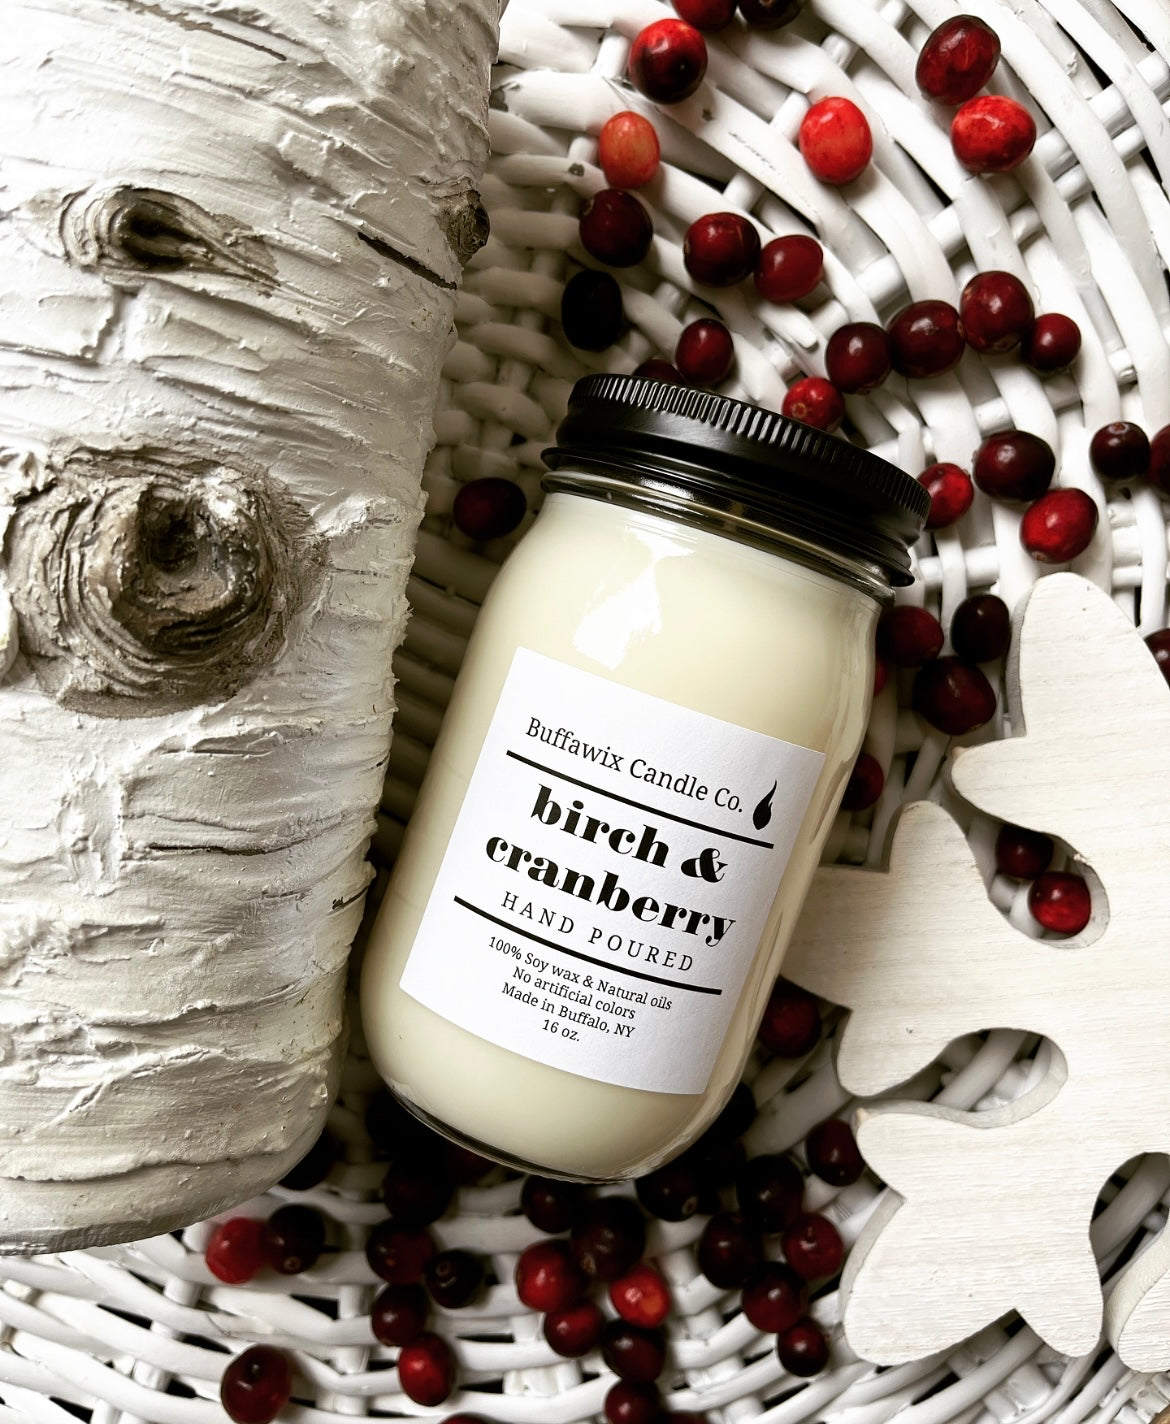 16oz Birch & Cranberrry Pure Soy Candle